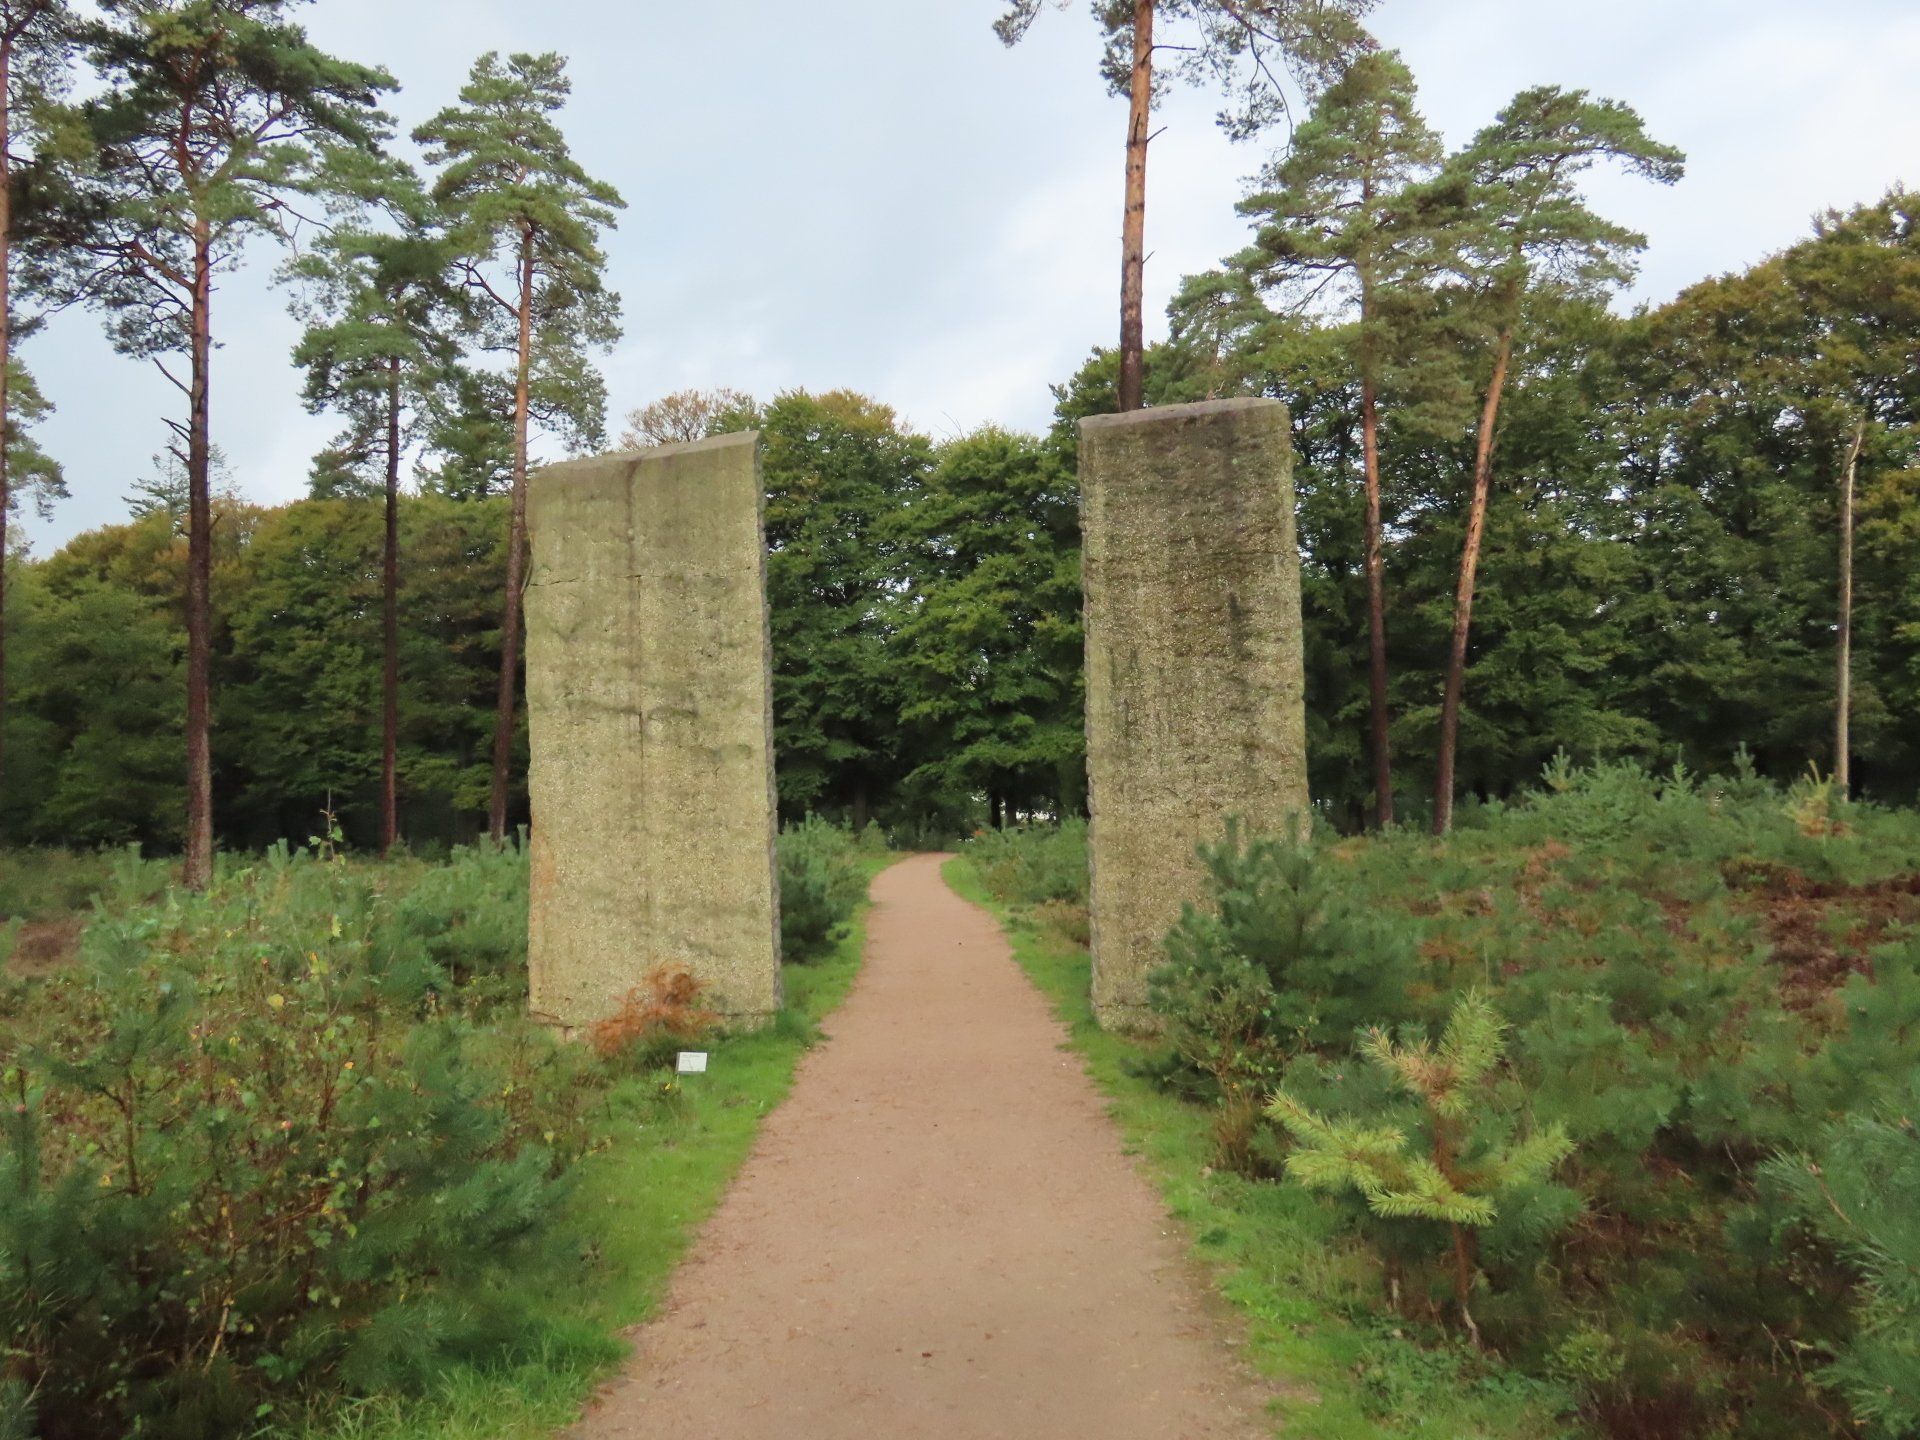 Hoge Veluwe National Park - slabs of solid rock cut without modern tools - forest entryway.